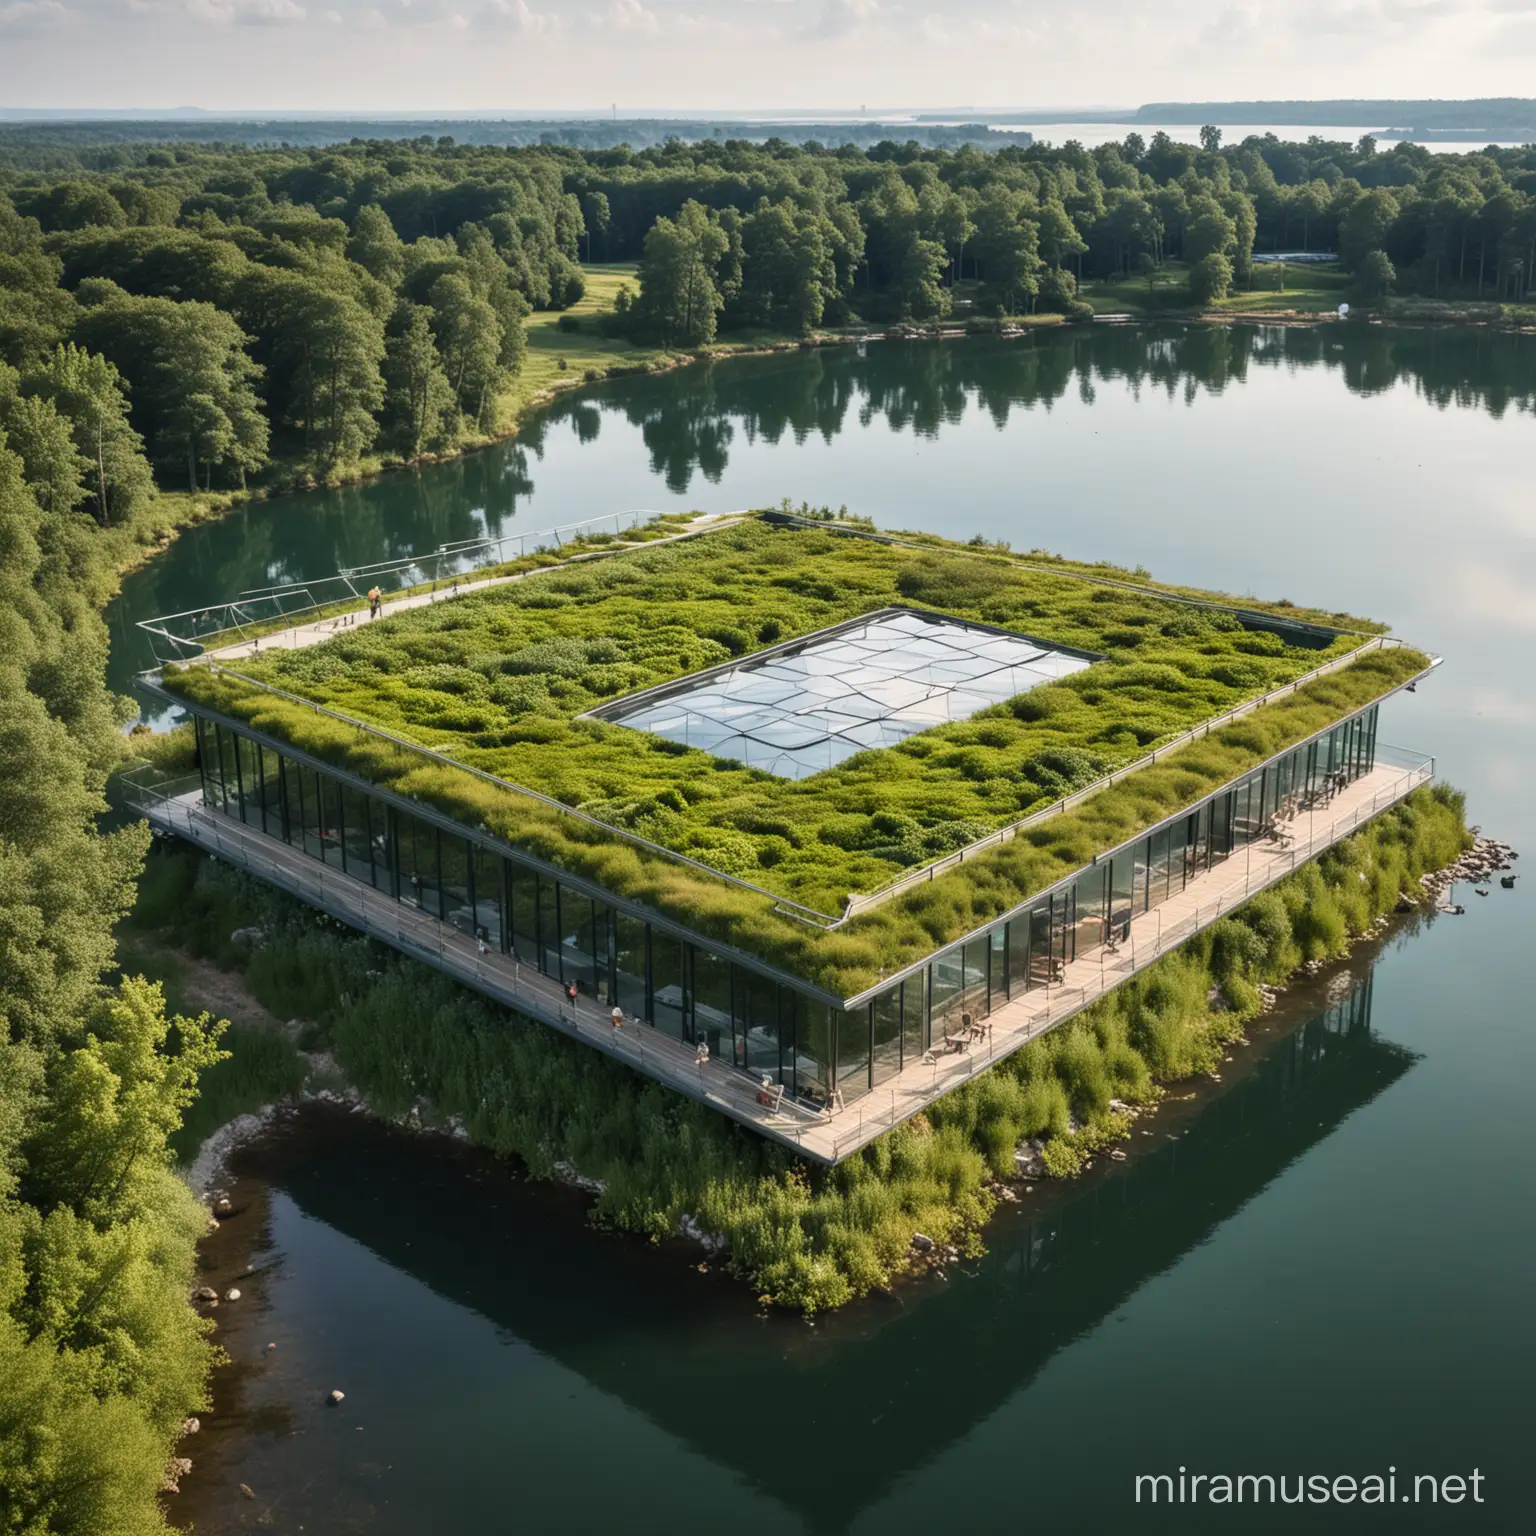 Green roof concept on glass walled superstructure surrounded by a lake